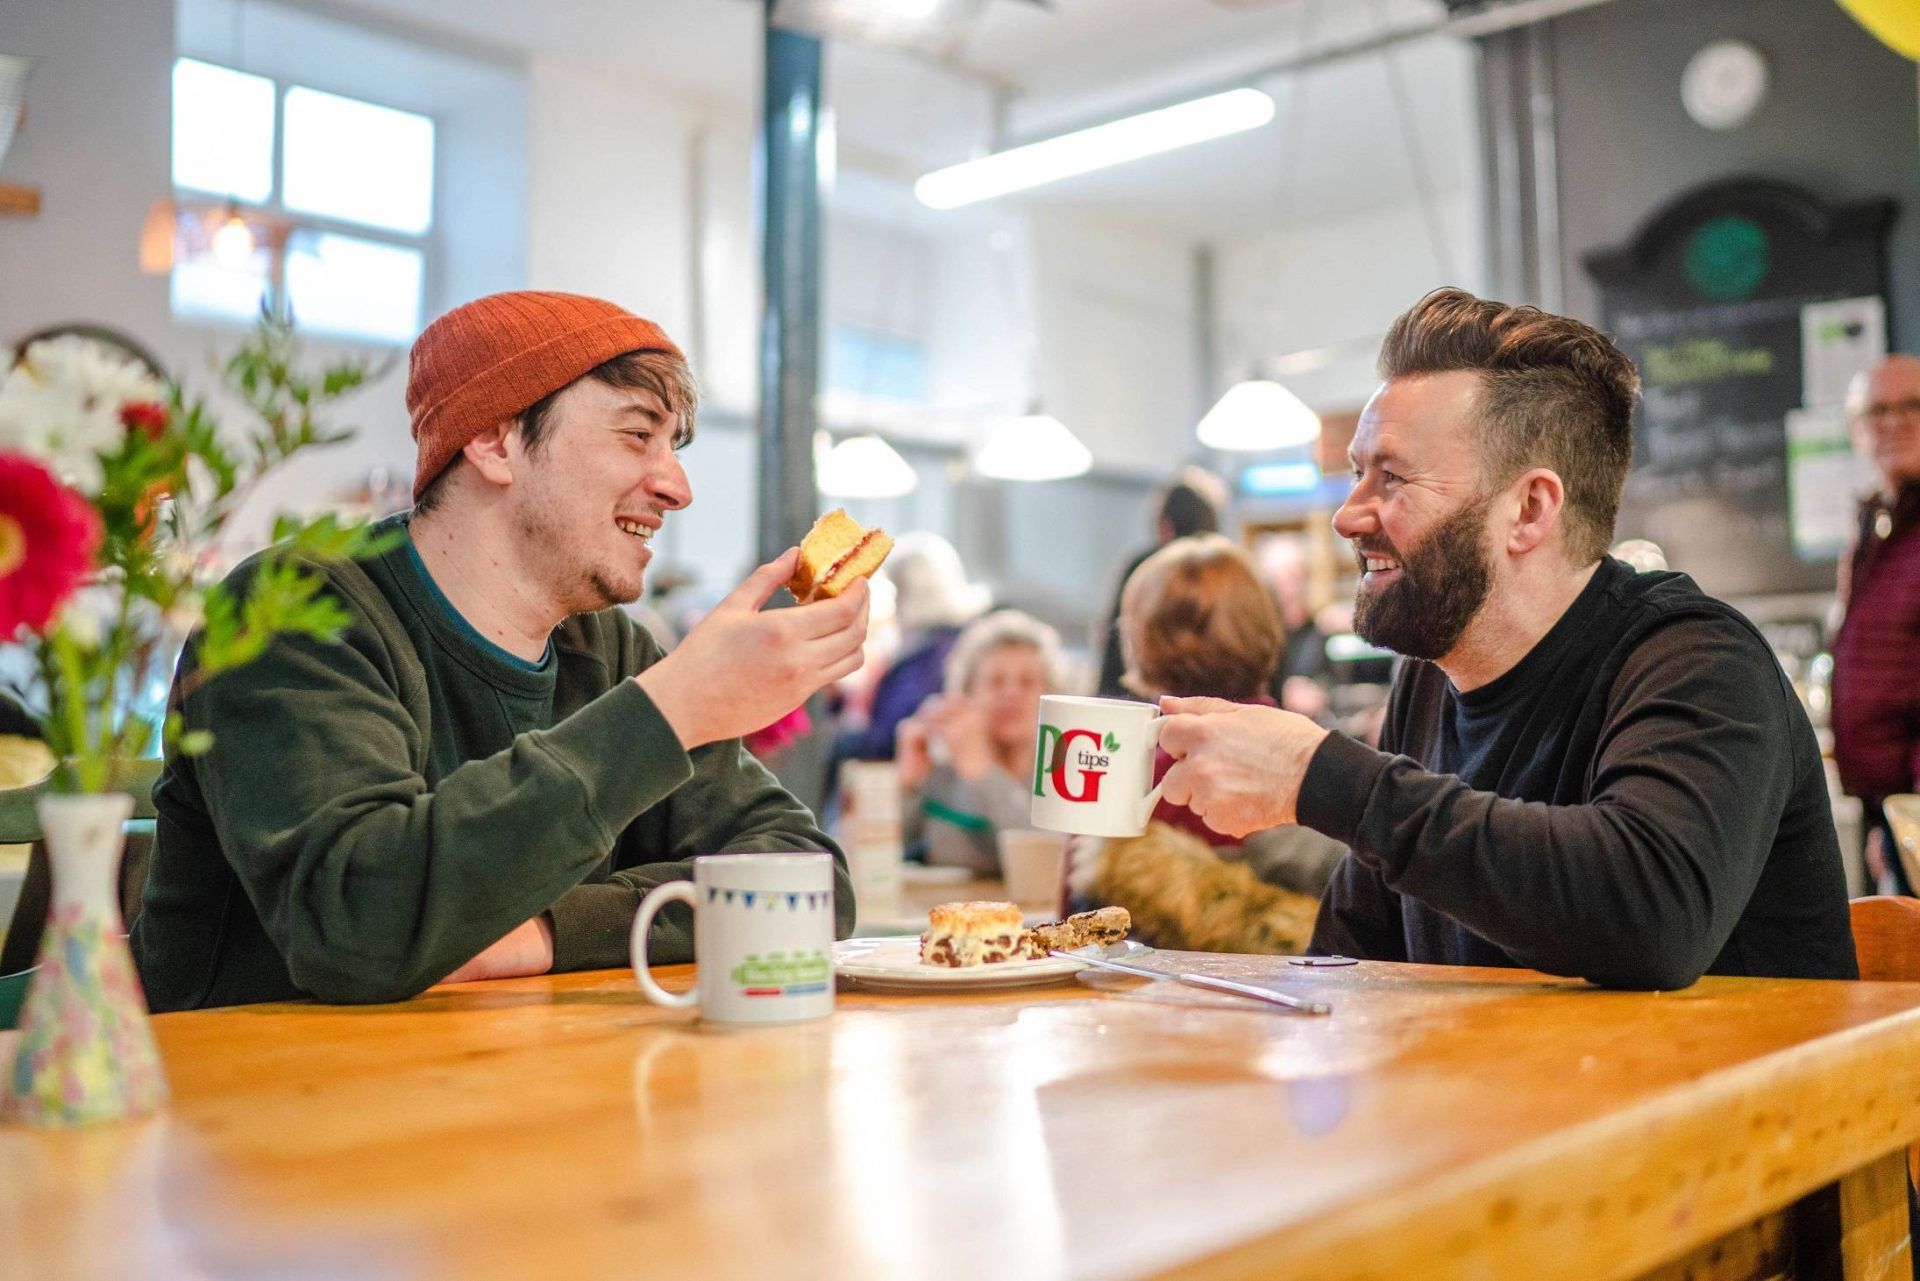 Two men laughing and enjoying a cup of tea at an indoor event.